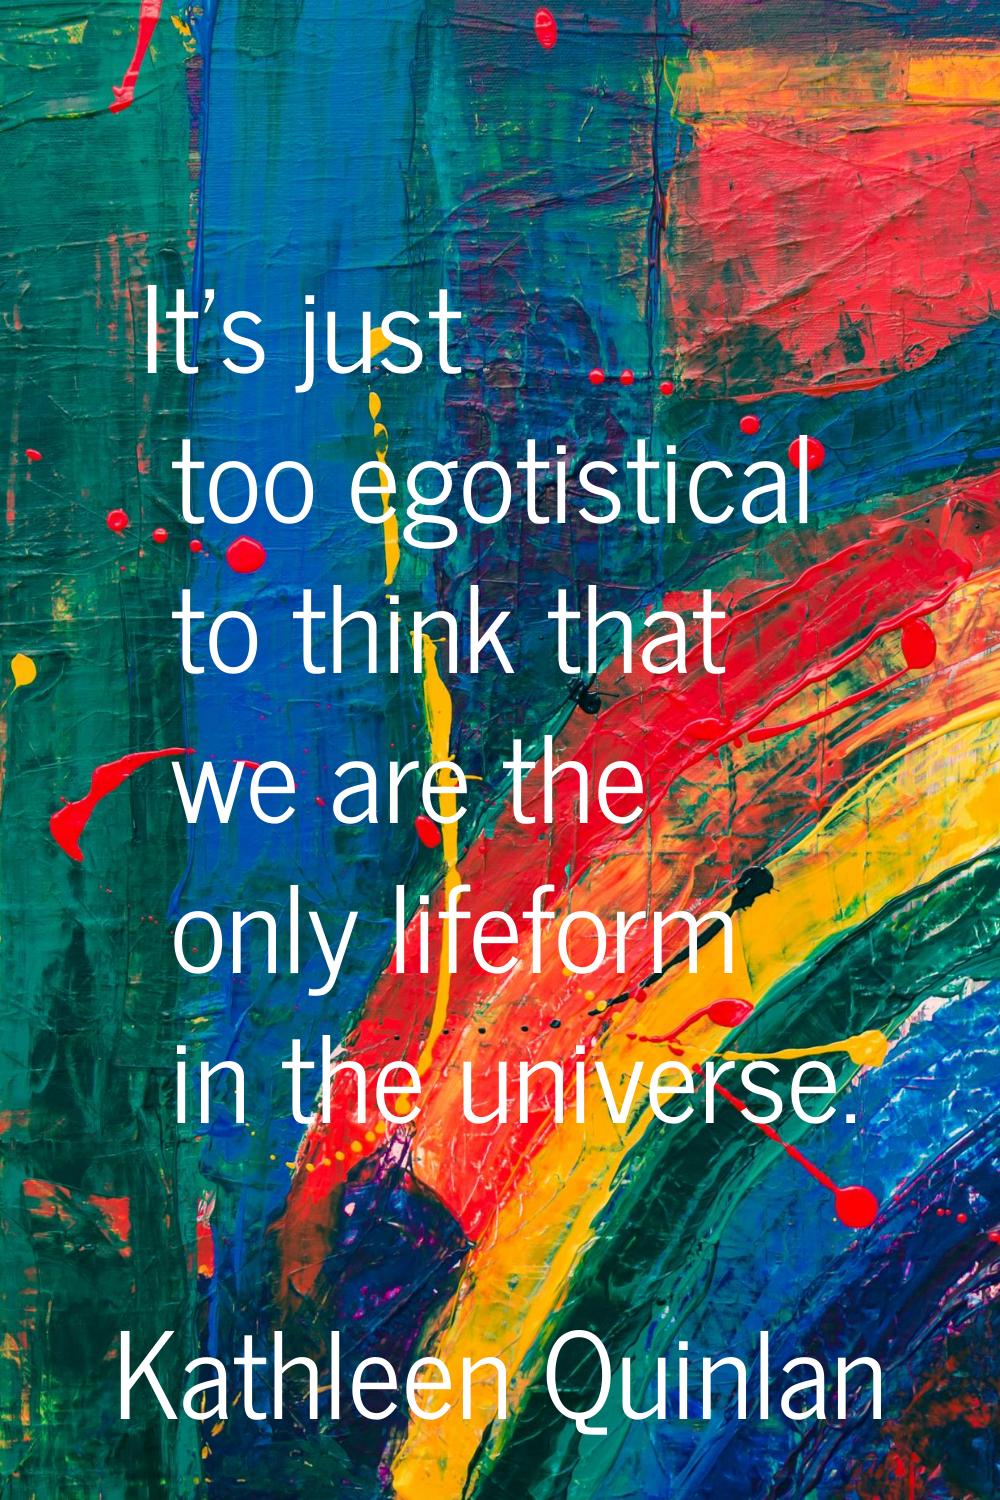 It's just too egotistical to think that we are the only lifeform in the universe.